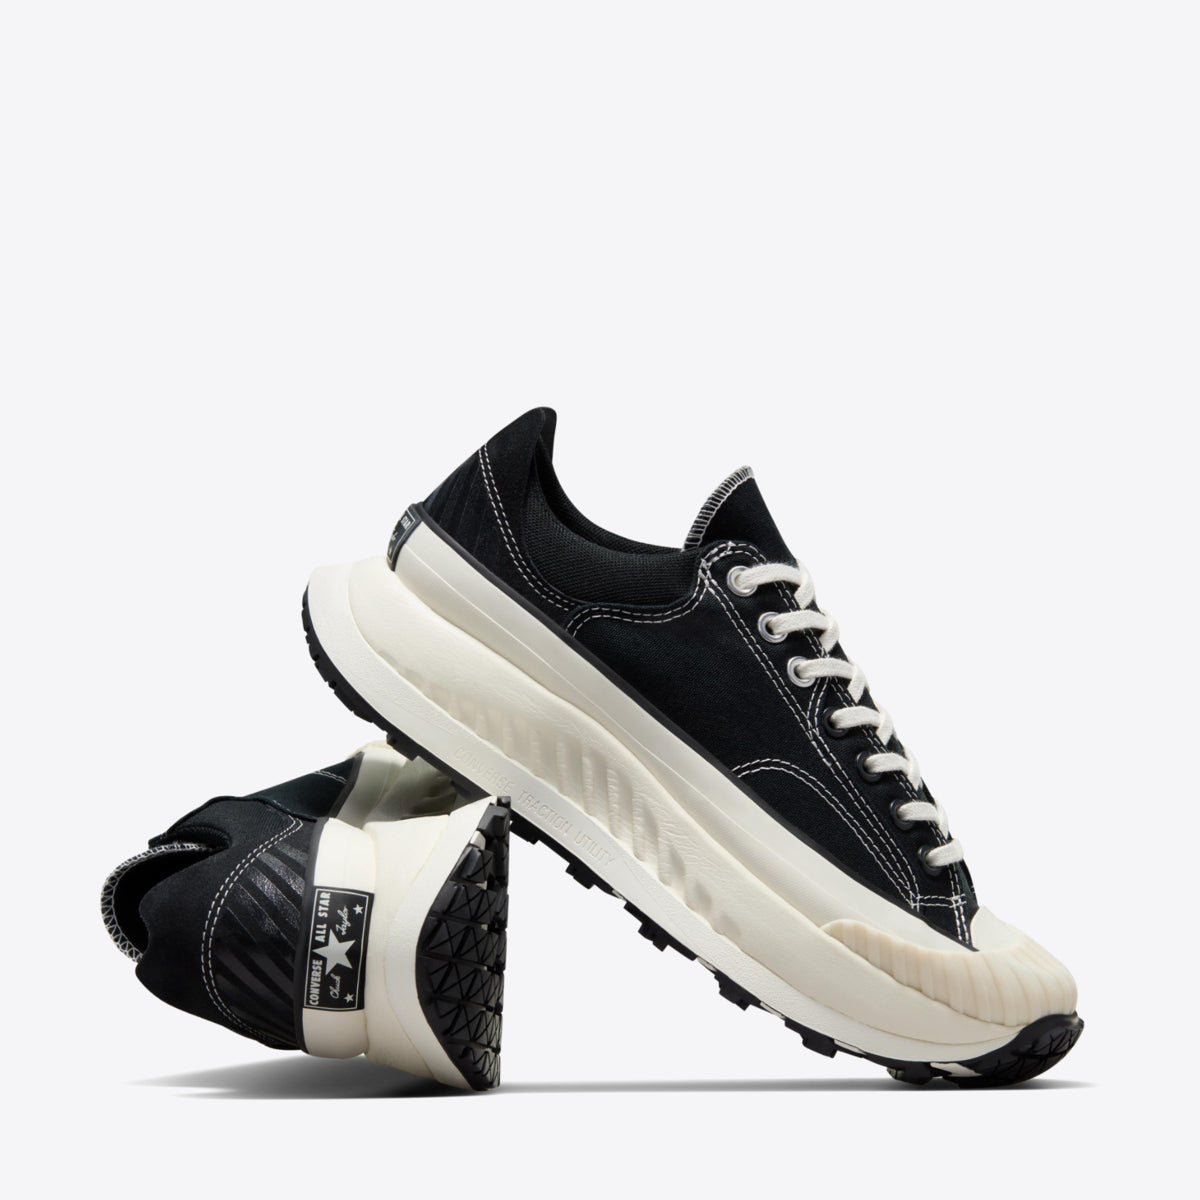 CONVERSE CT 70 AT Future Utility Low Black - Image 7